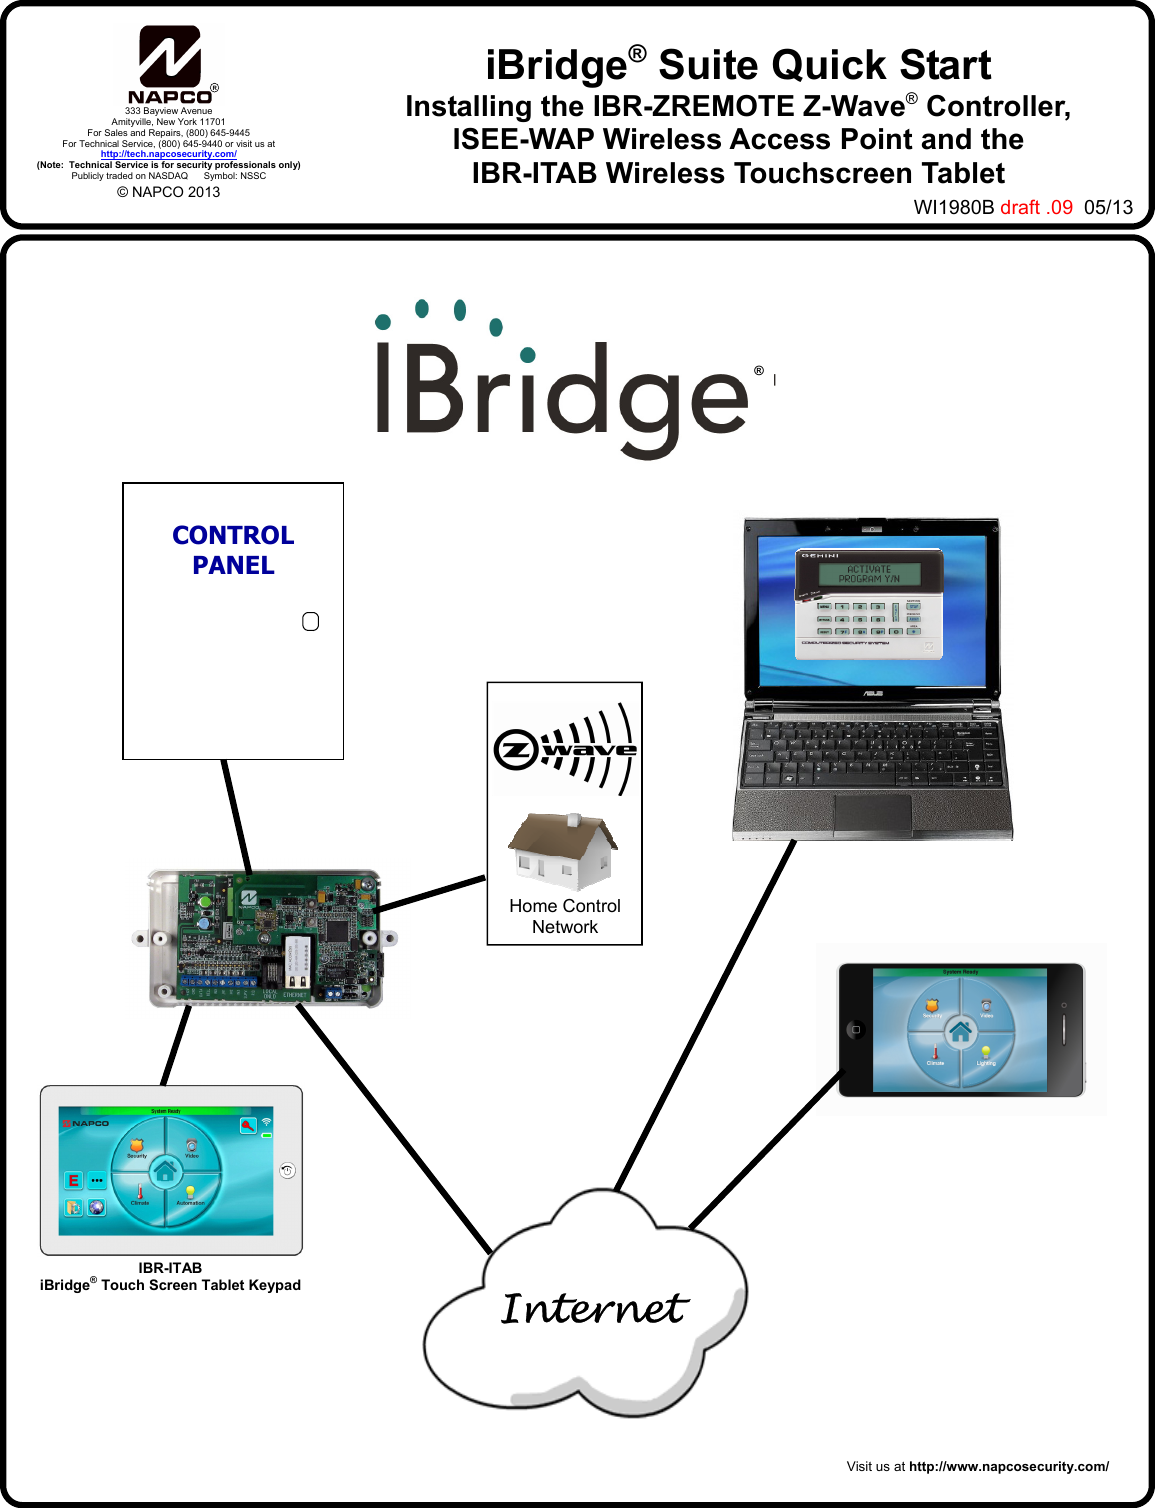 1  iBridge® Suite Quick Start Installing the IBR-ZREMOTE Z-Wave® Controller,  ISEE-WAP Wireless Access Point and the  IBR-ITAB Wireless Touchscreen Tablet  Internet  CONTROL  PANEL WI1980B draft .09  05/13 Home Control Network Visit us at http://www.napcosecurity.com/ IBR-ITAB  iBridge® Touch Screen Tablet Keypad  ® R333 Bayview Avenue Amityville, New York 11701 For Sales and Repairs, (800) 645-9445 For Technical Service, (800) 645-9440 or visit us at http://tech.napcosecurity.com/ (Note:  Technical Service is for security professionals only) Publicly traded on NASDAQ      Symbol: NSSC © NAPCO 2013 